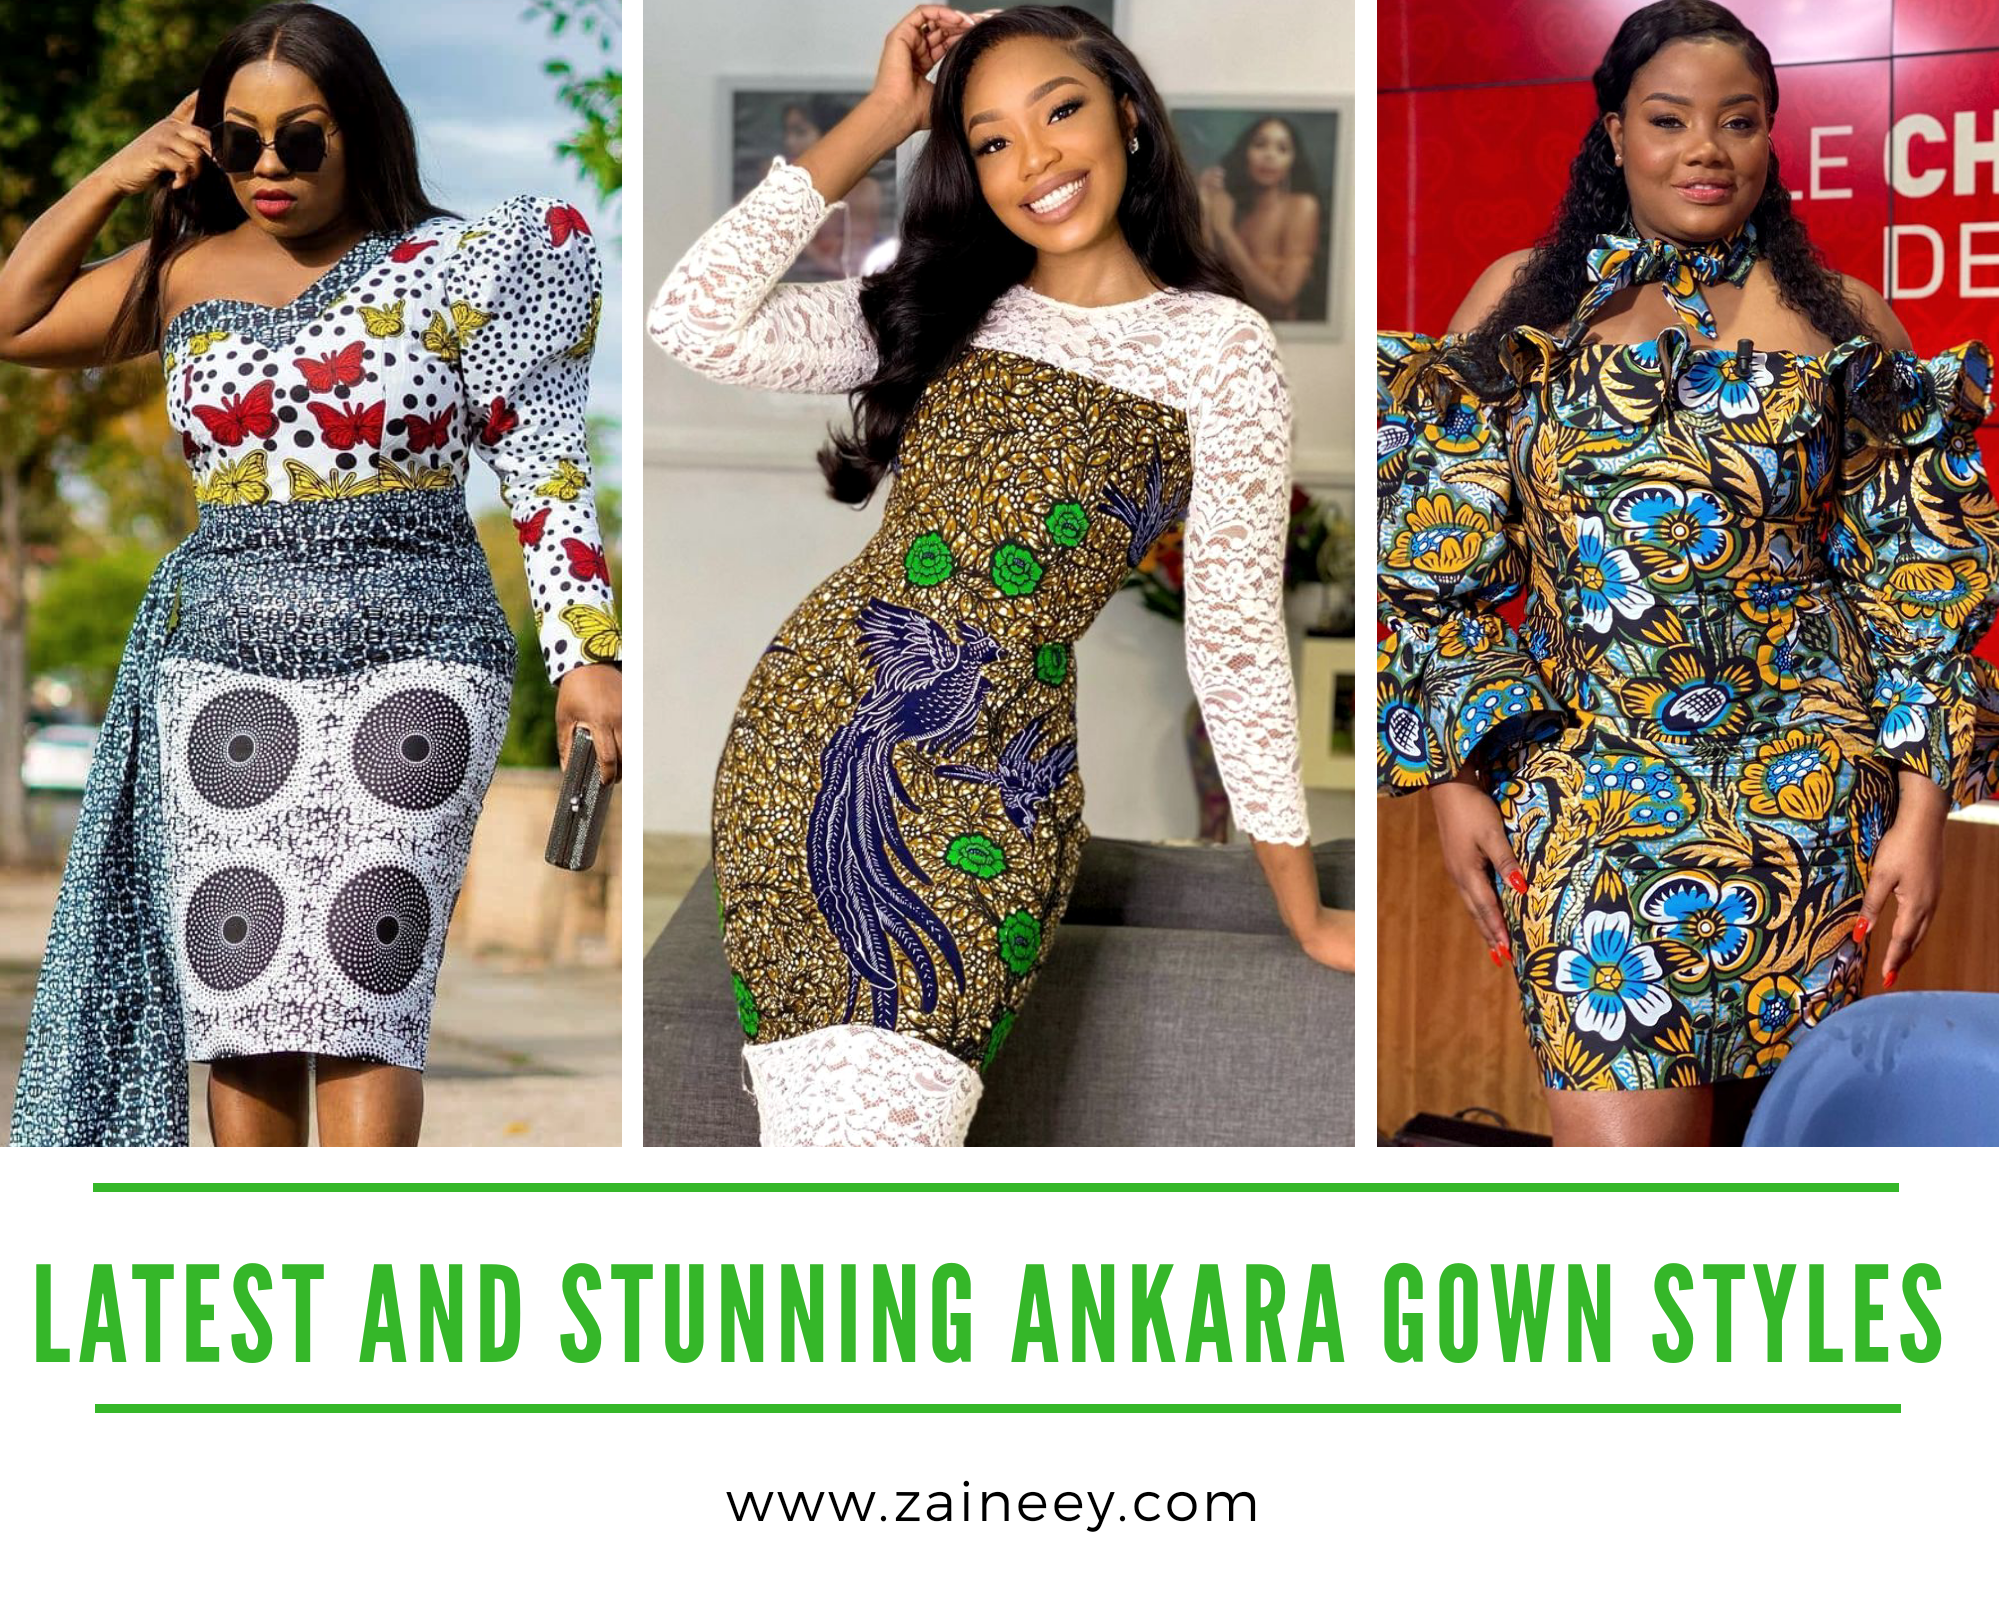 Latest And Stunning Ankara Gown Styles to look Fashionable and Stylish